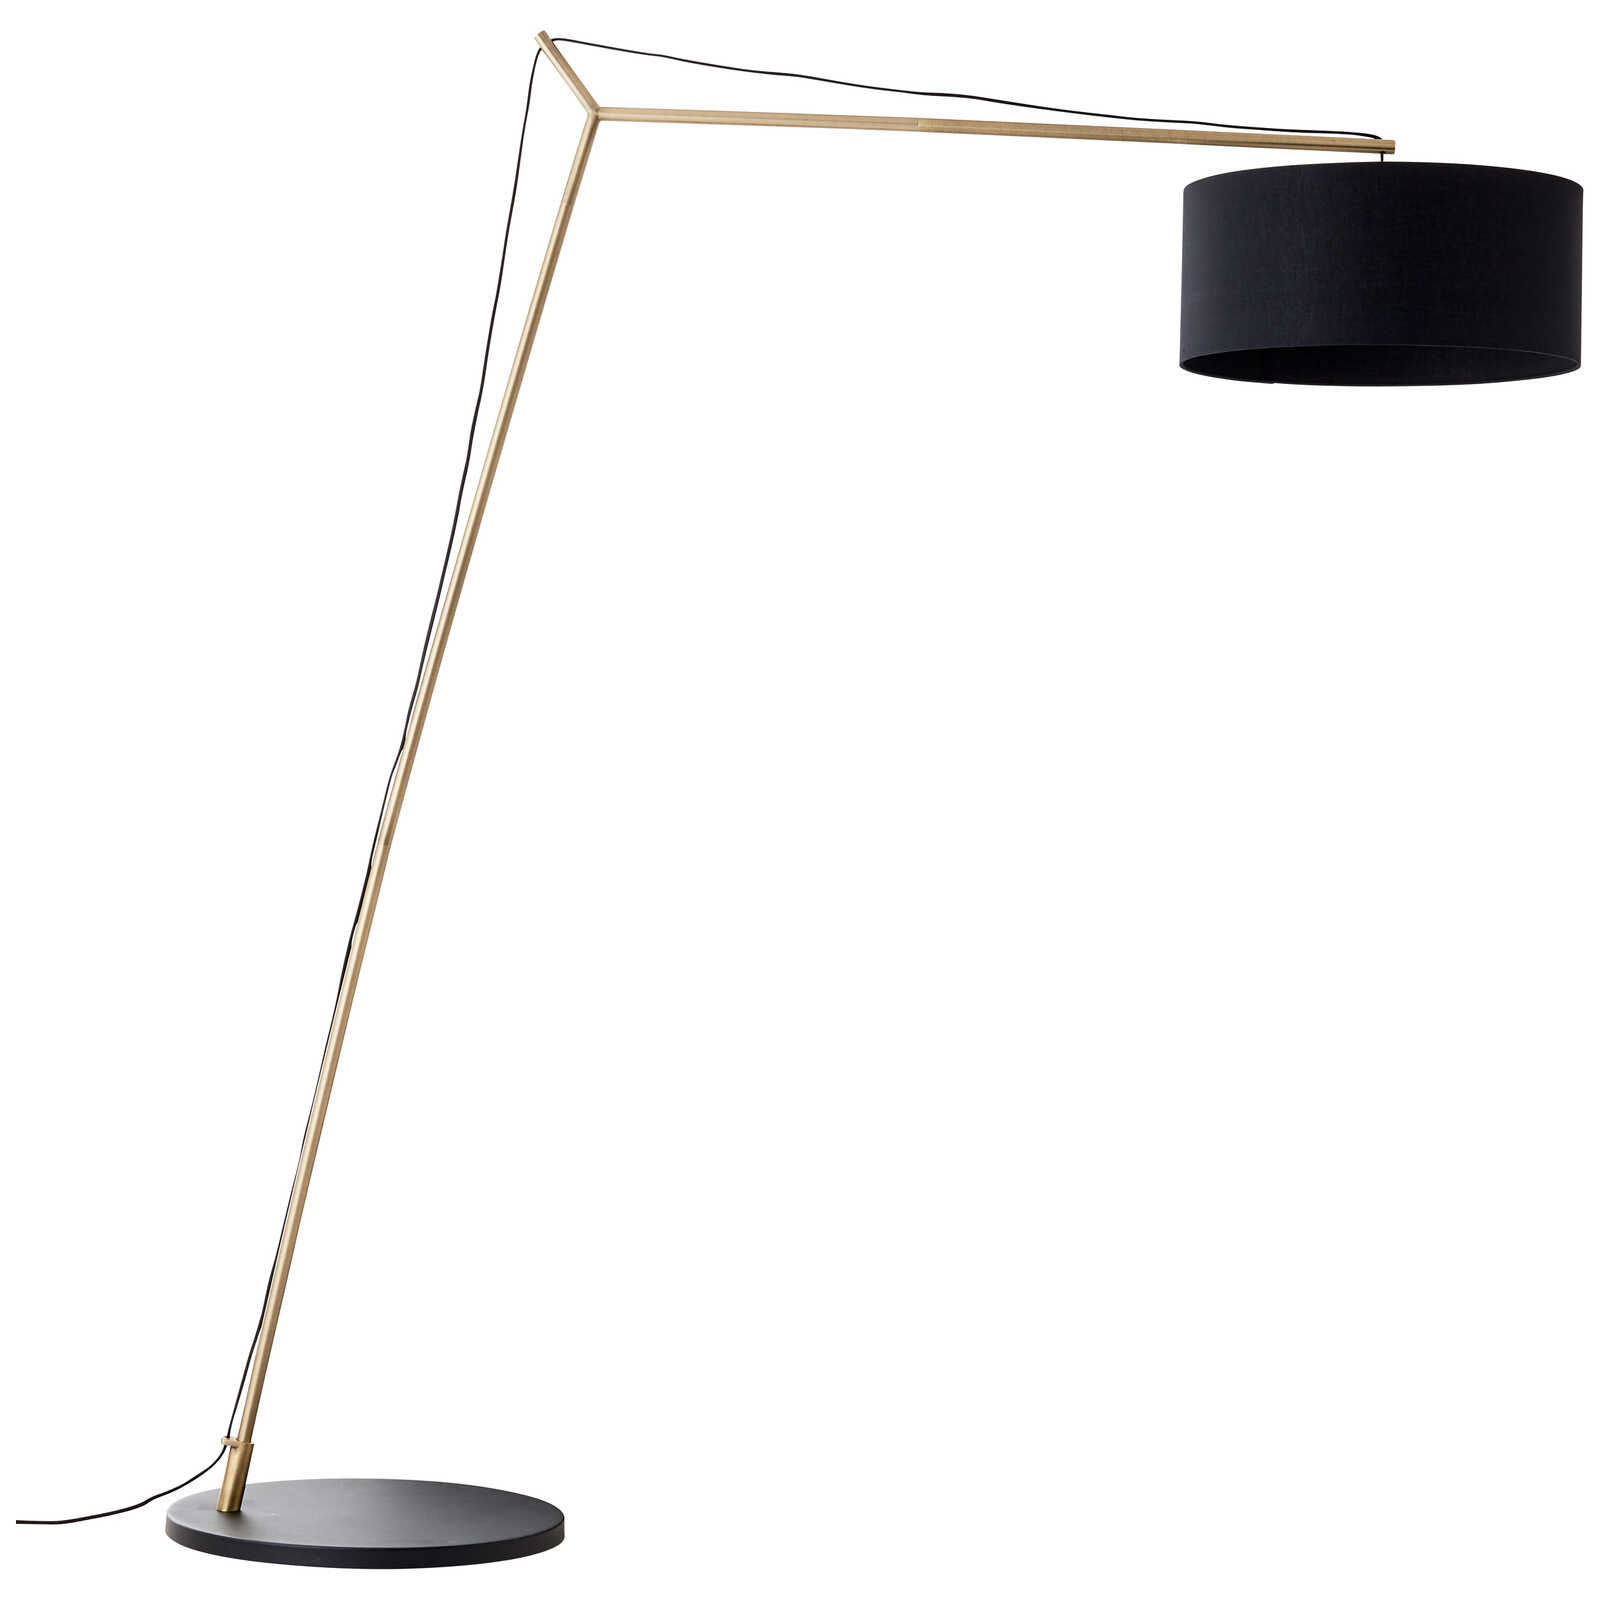             Arched textile floor lamp - Alisa 2 - Gold
        